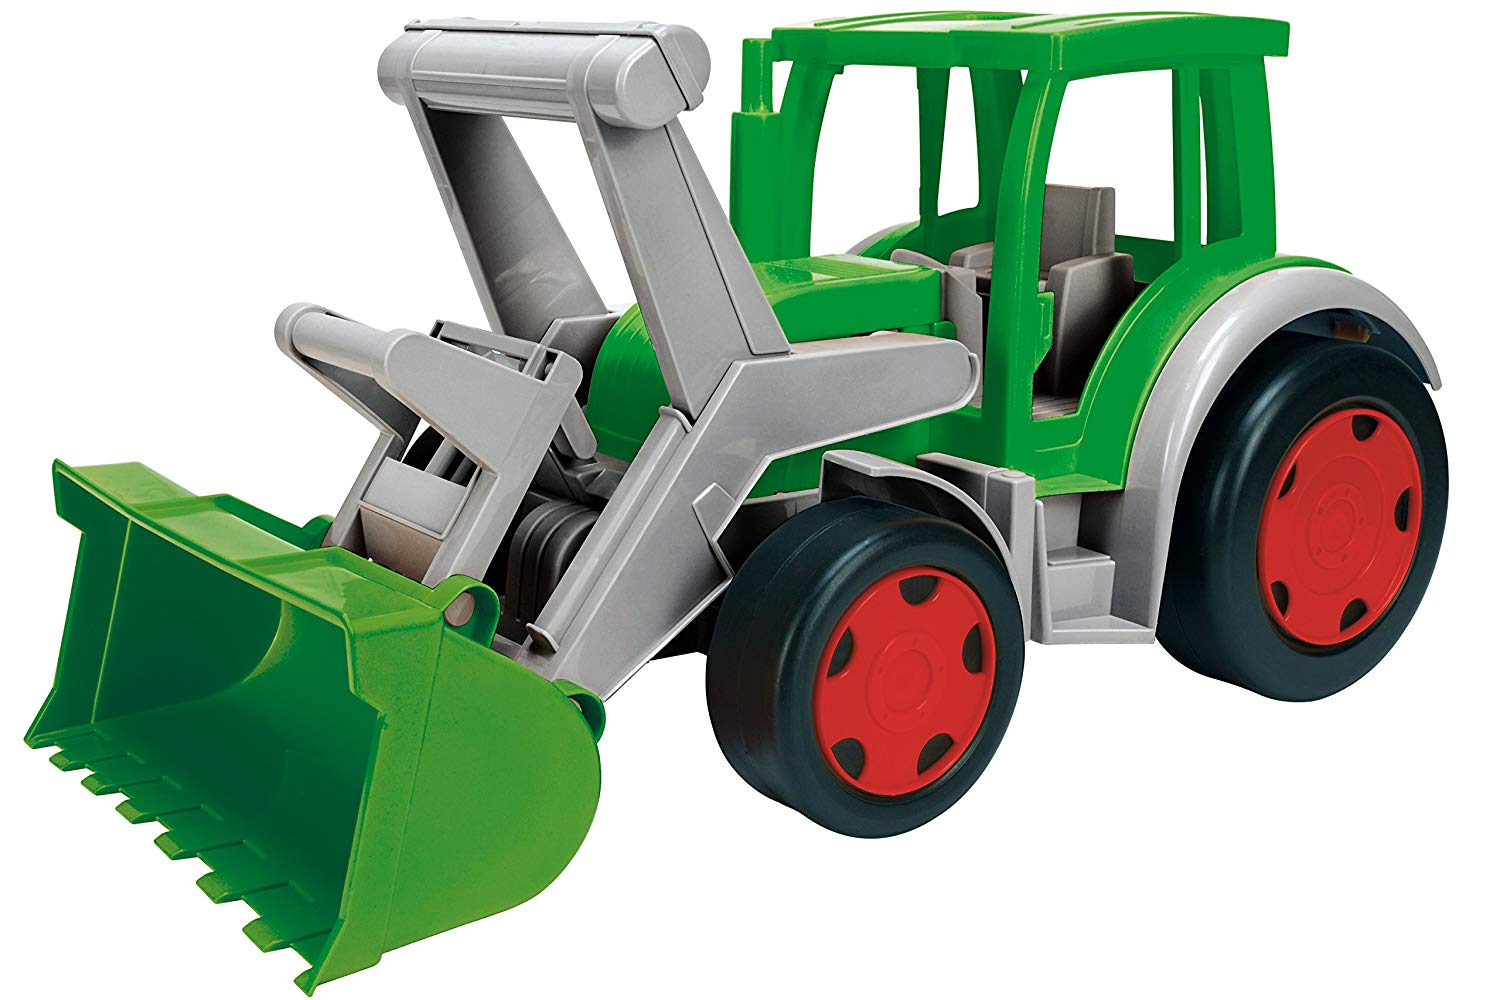 Wadder Gigant Farmer Style Tractor Green